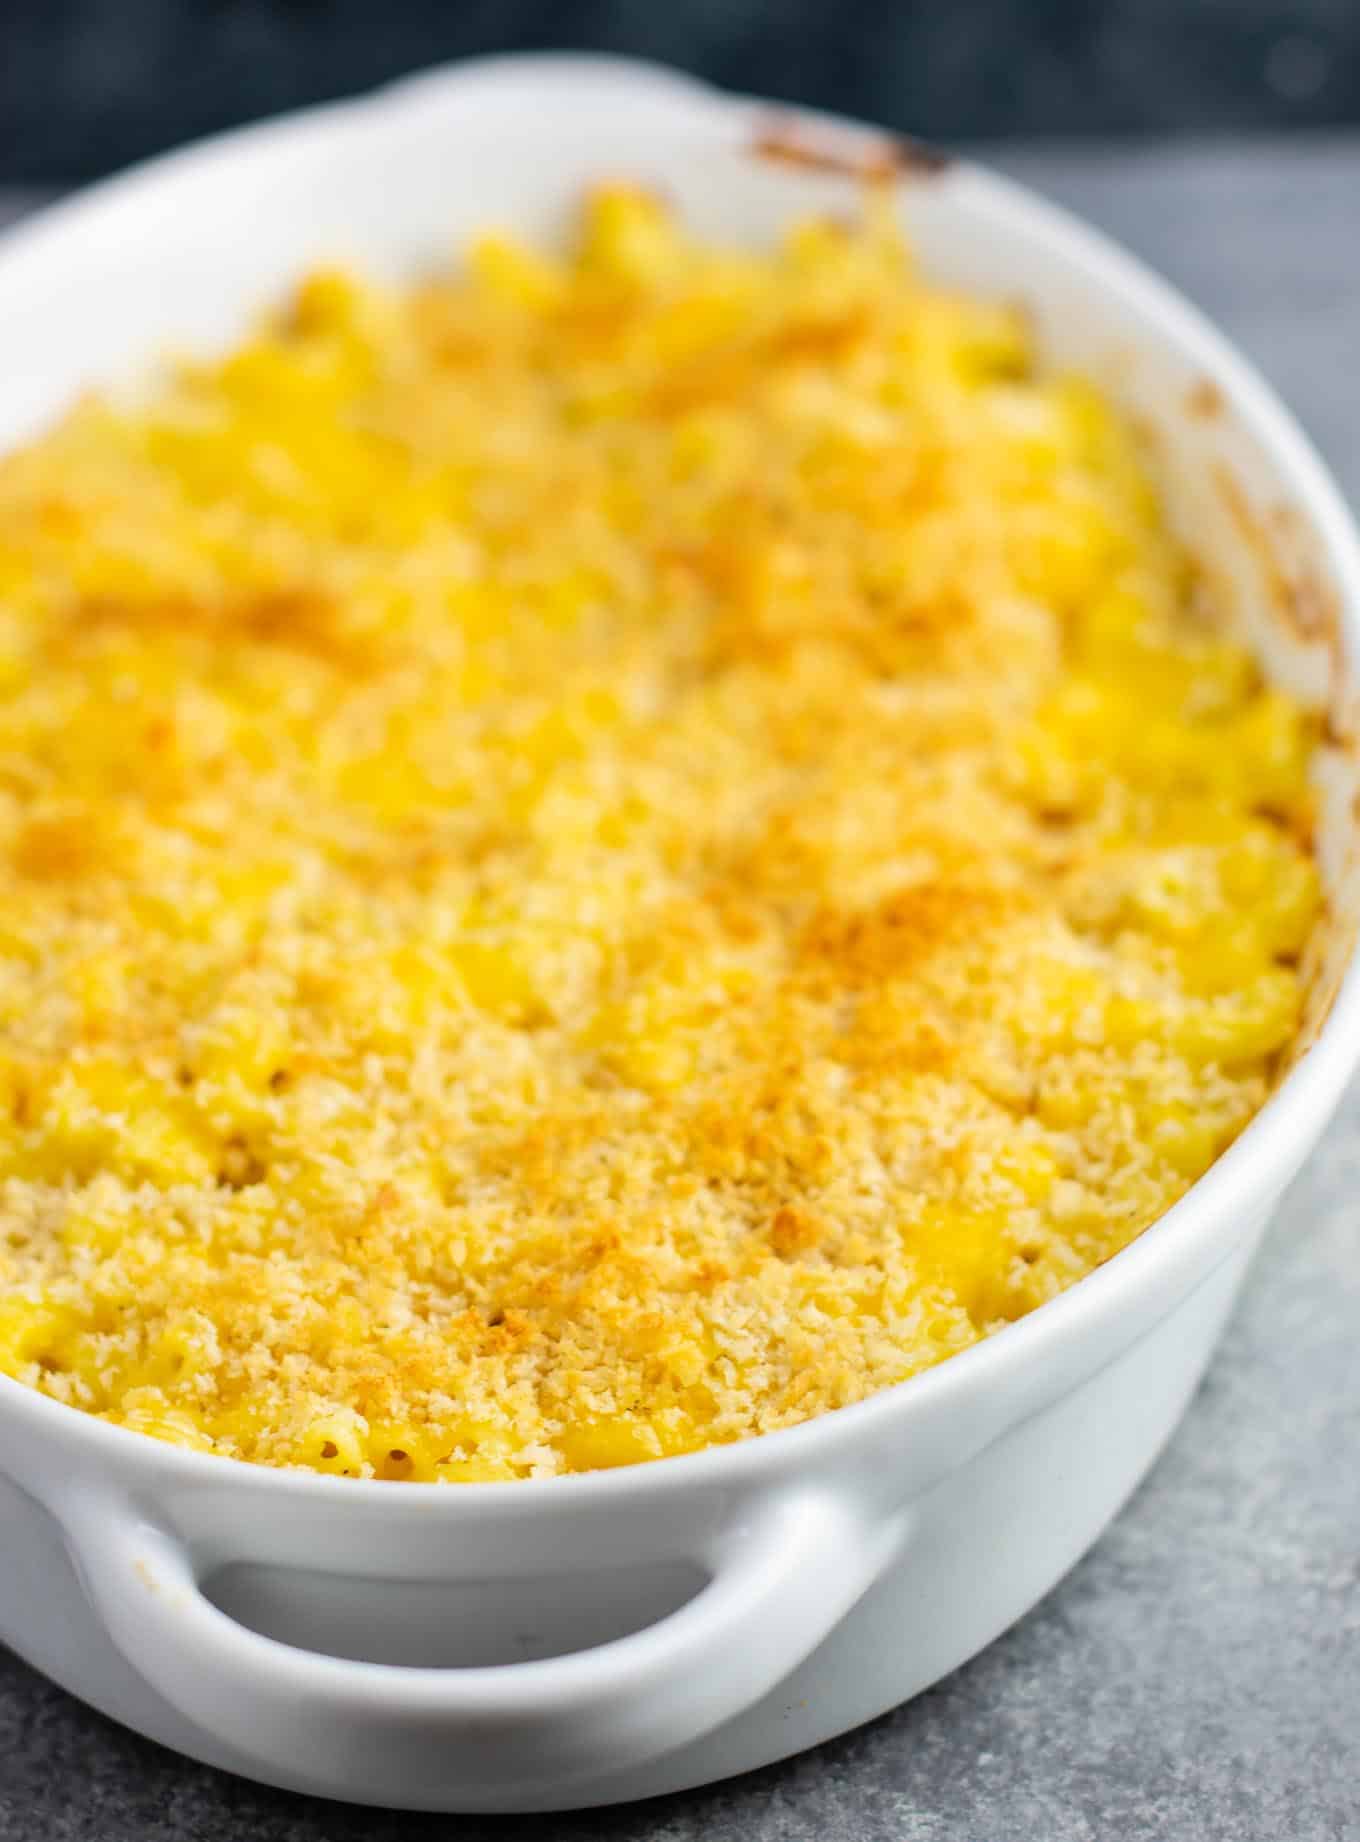 Homemade baked macaroni and cheese recipe. Classic baked comfort food that the whole family will love! #macaroniandcheese #bakedmacaroniandcheese #comfortfood #sidedish #macandcheese #soulfood 